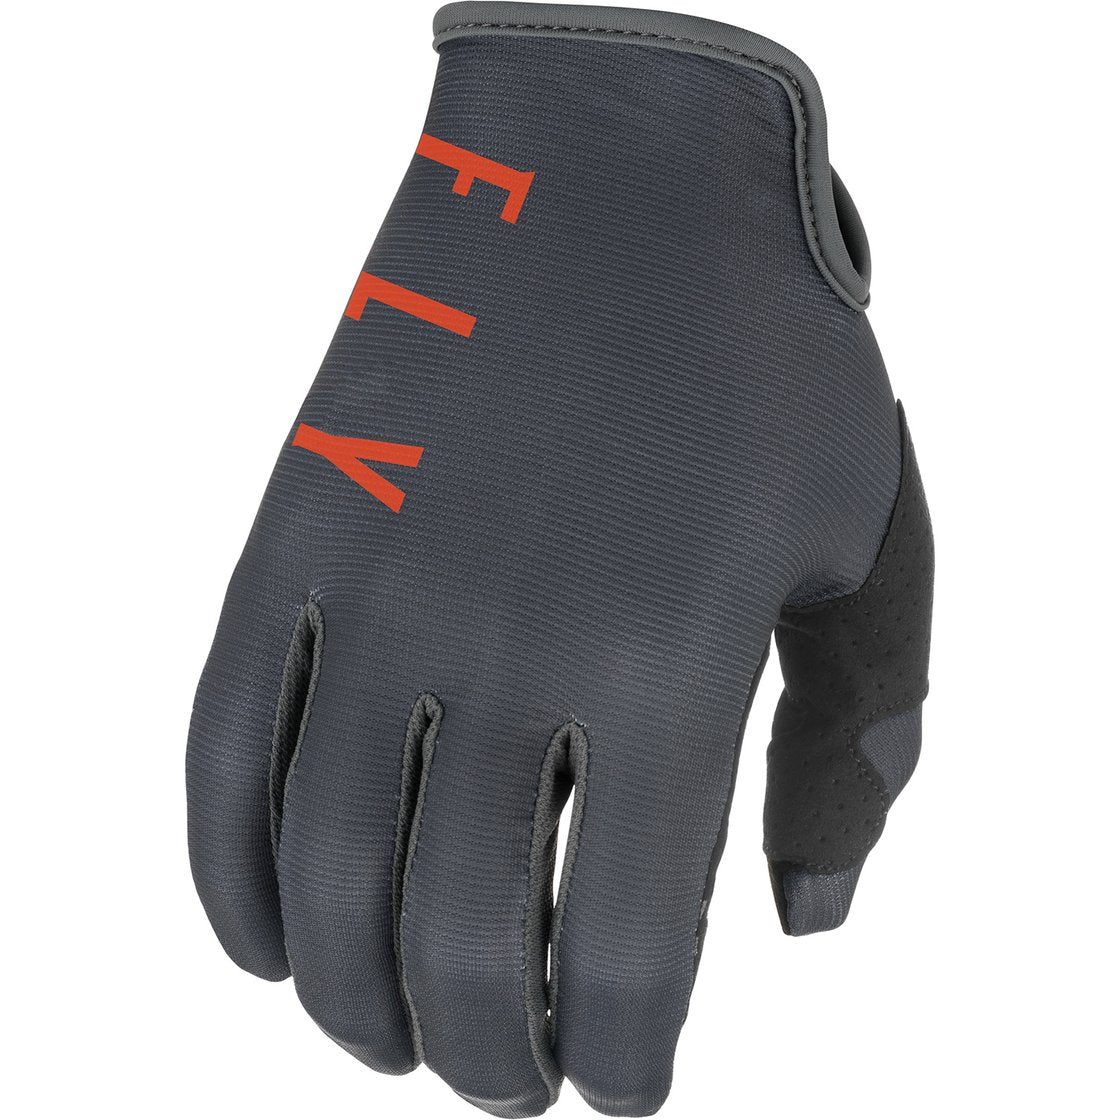 FLY RACING LITE 2021 GLOVES